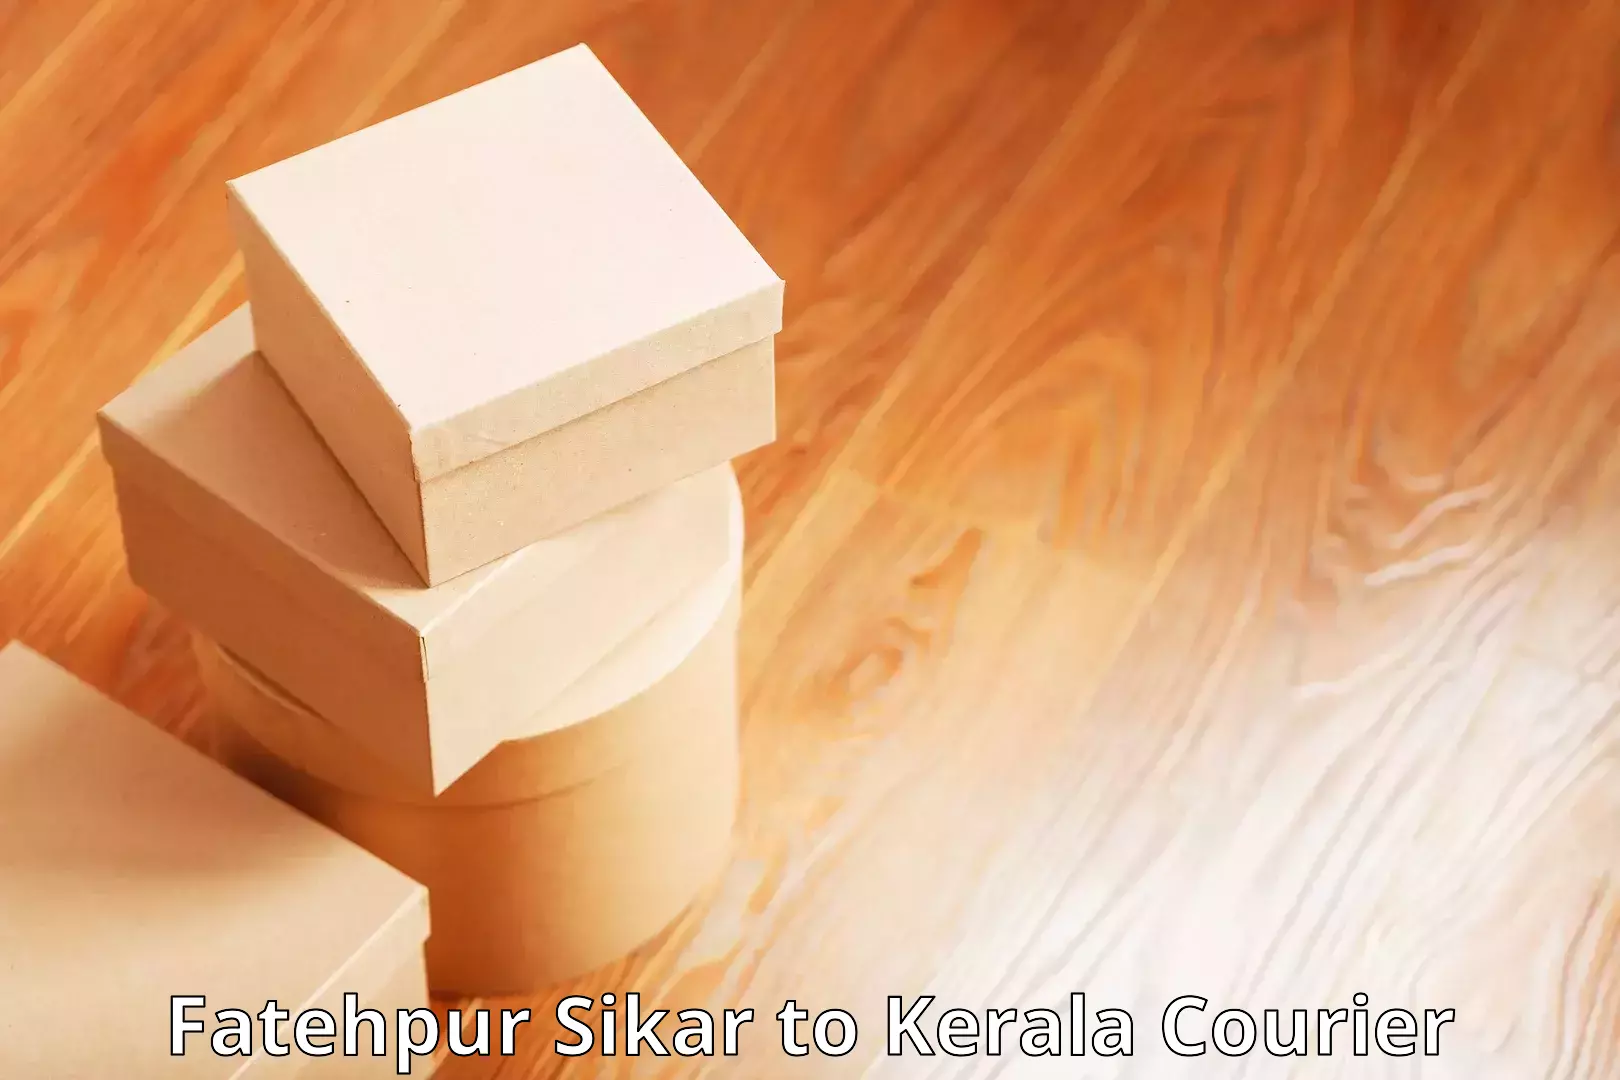 Corporate courier solutions Fatehpur Sikar to Kerala